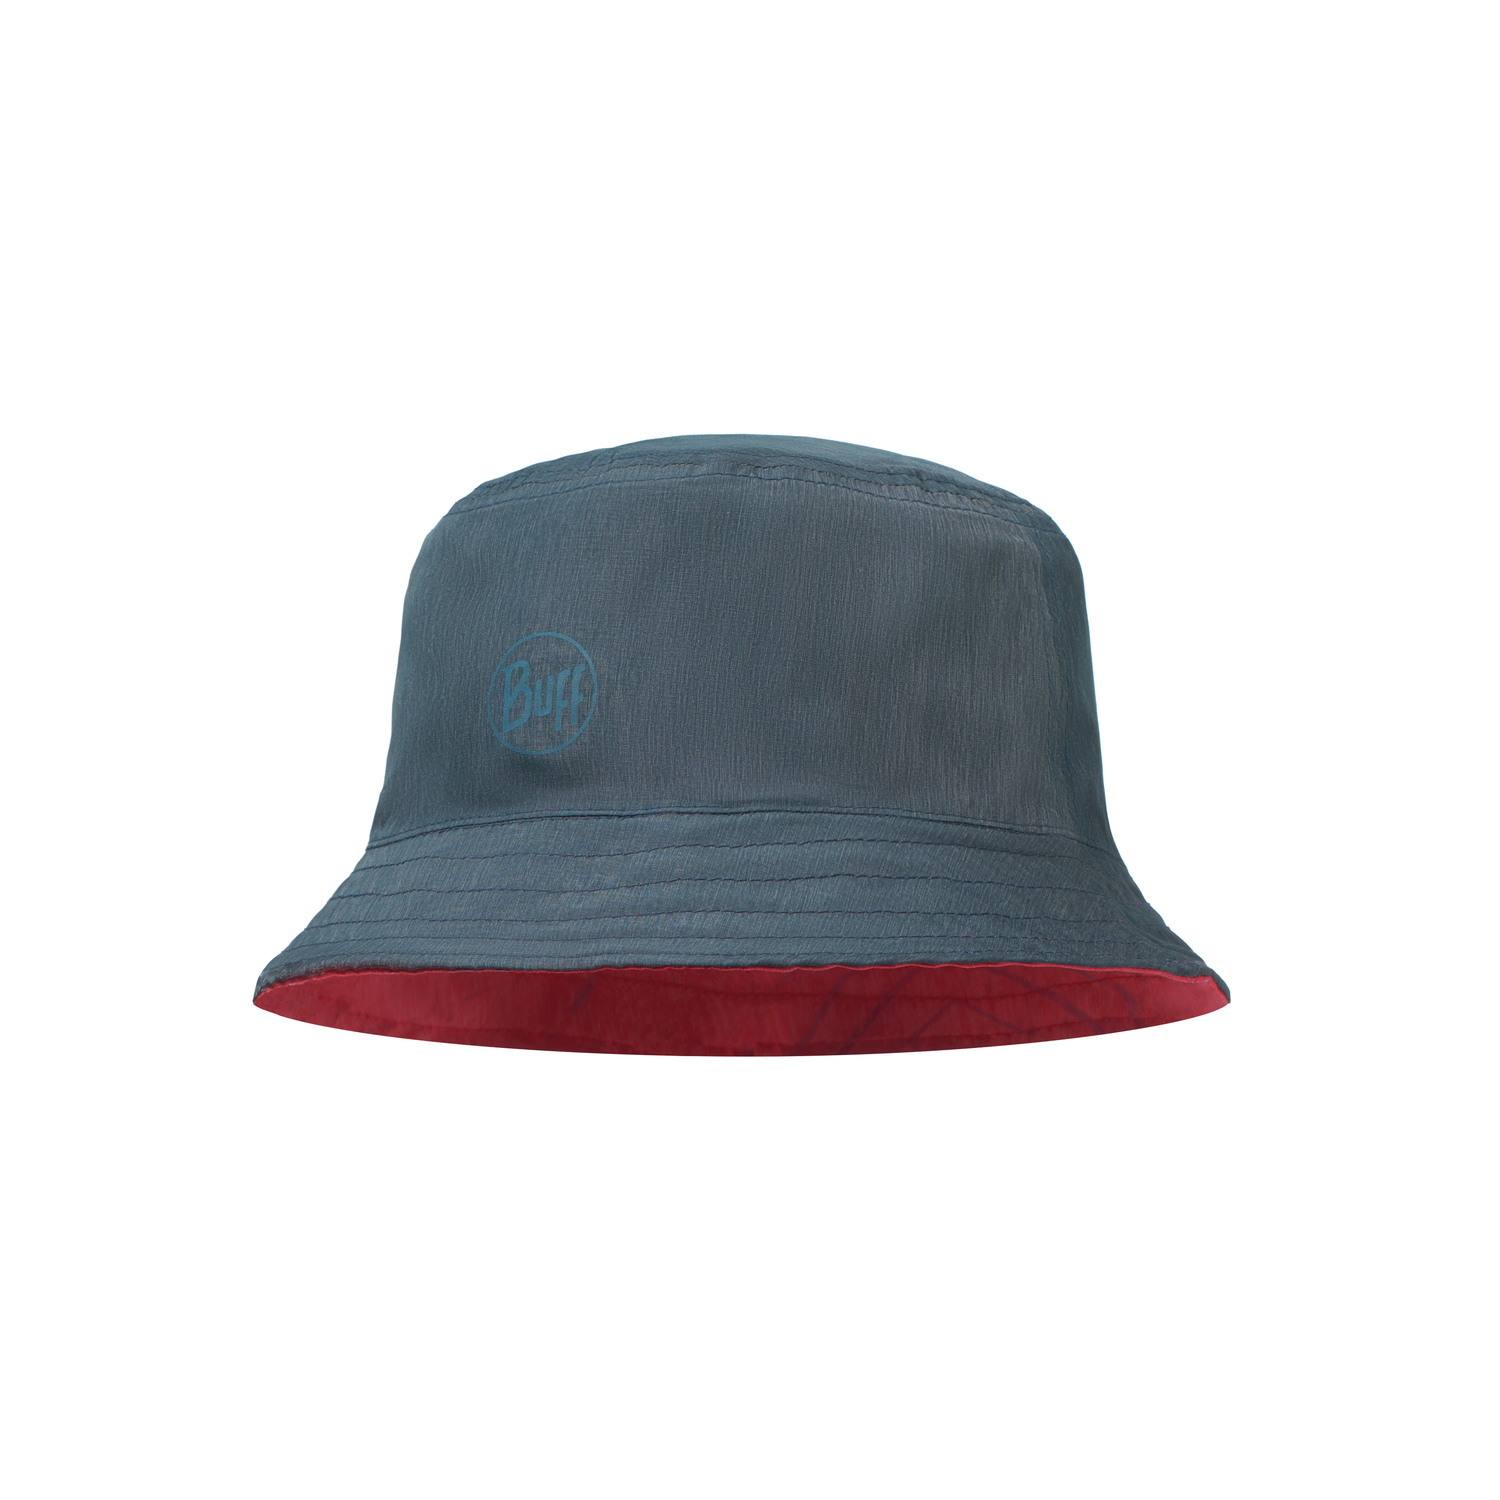 Панама Buff Travel Bucket Hat Collage Red-Black